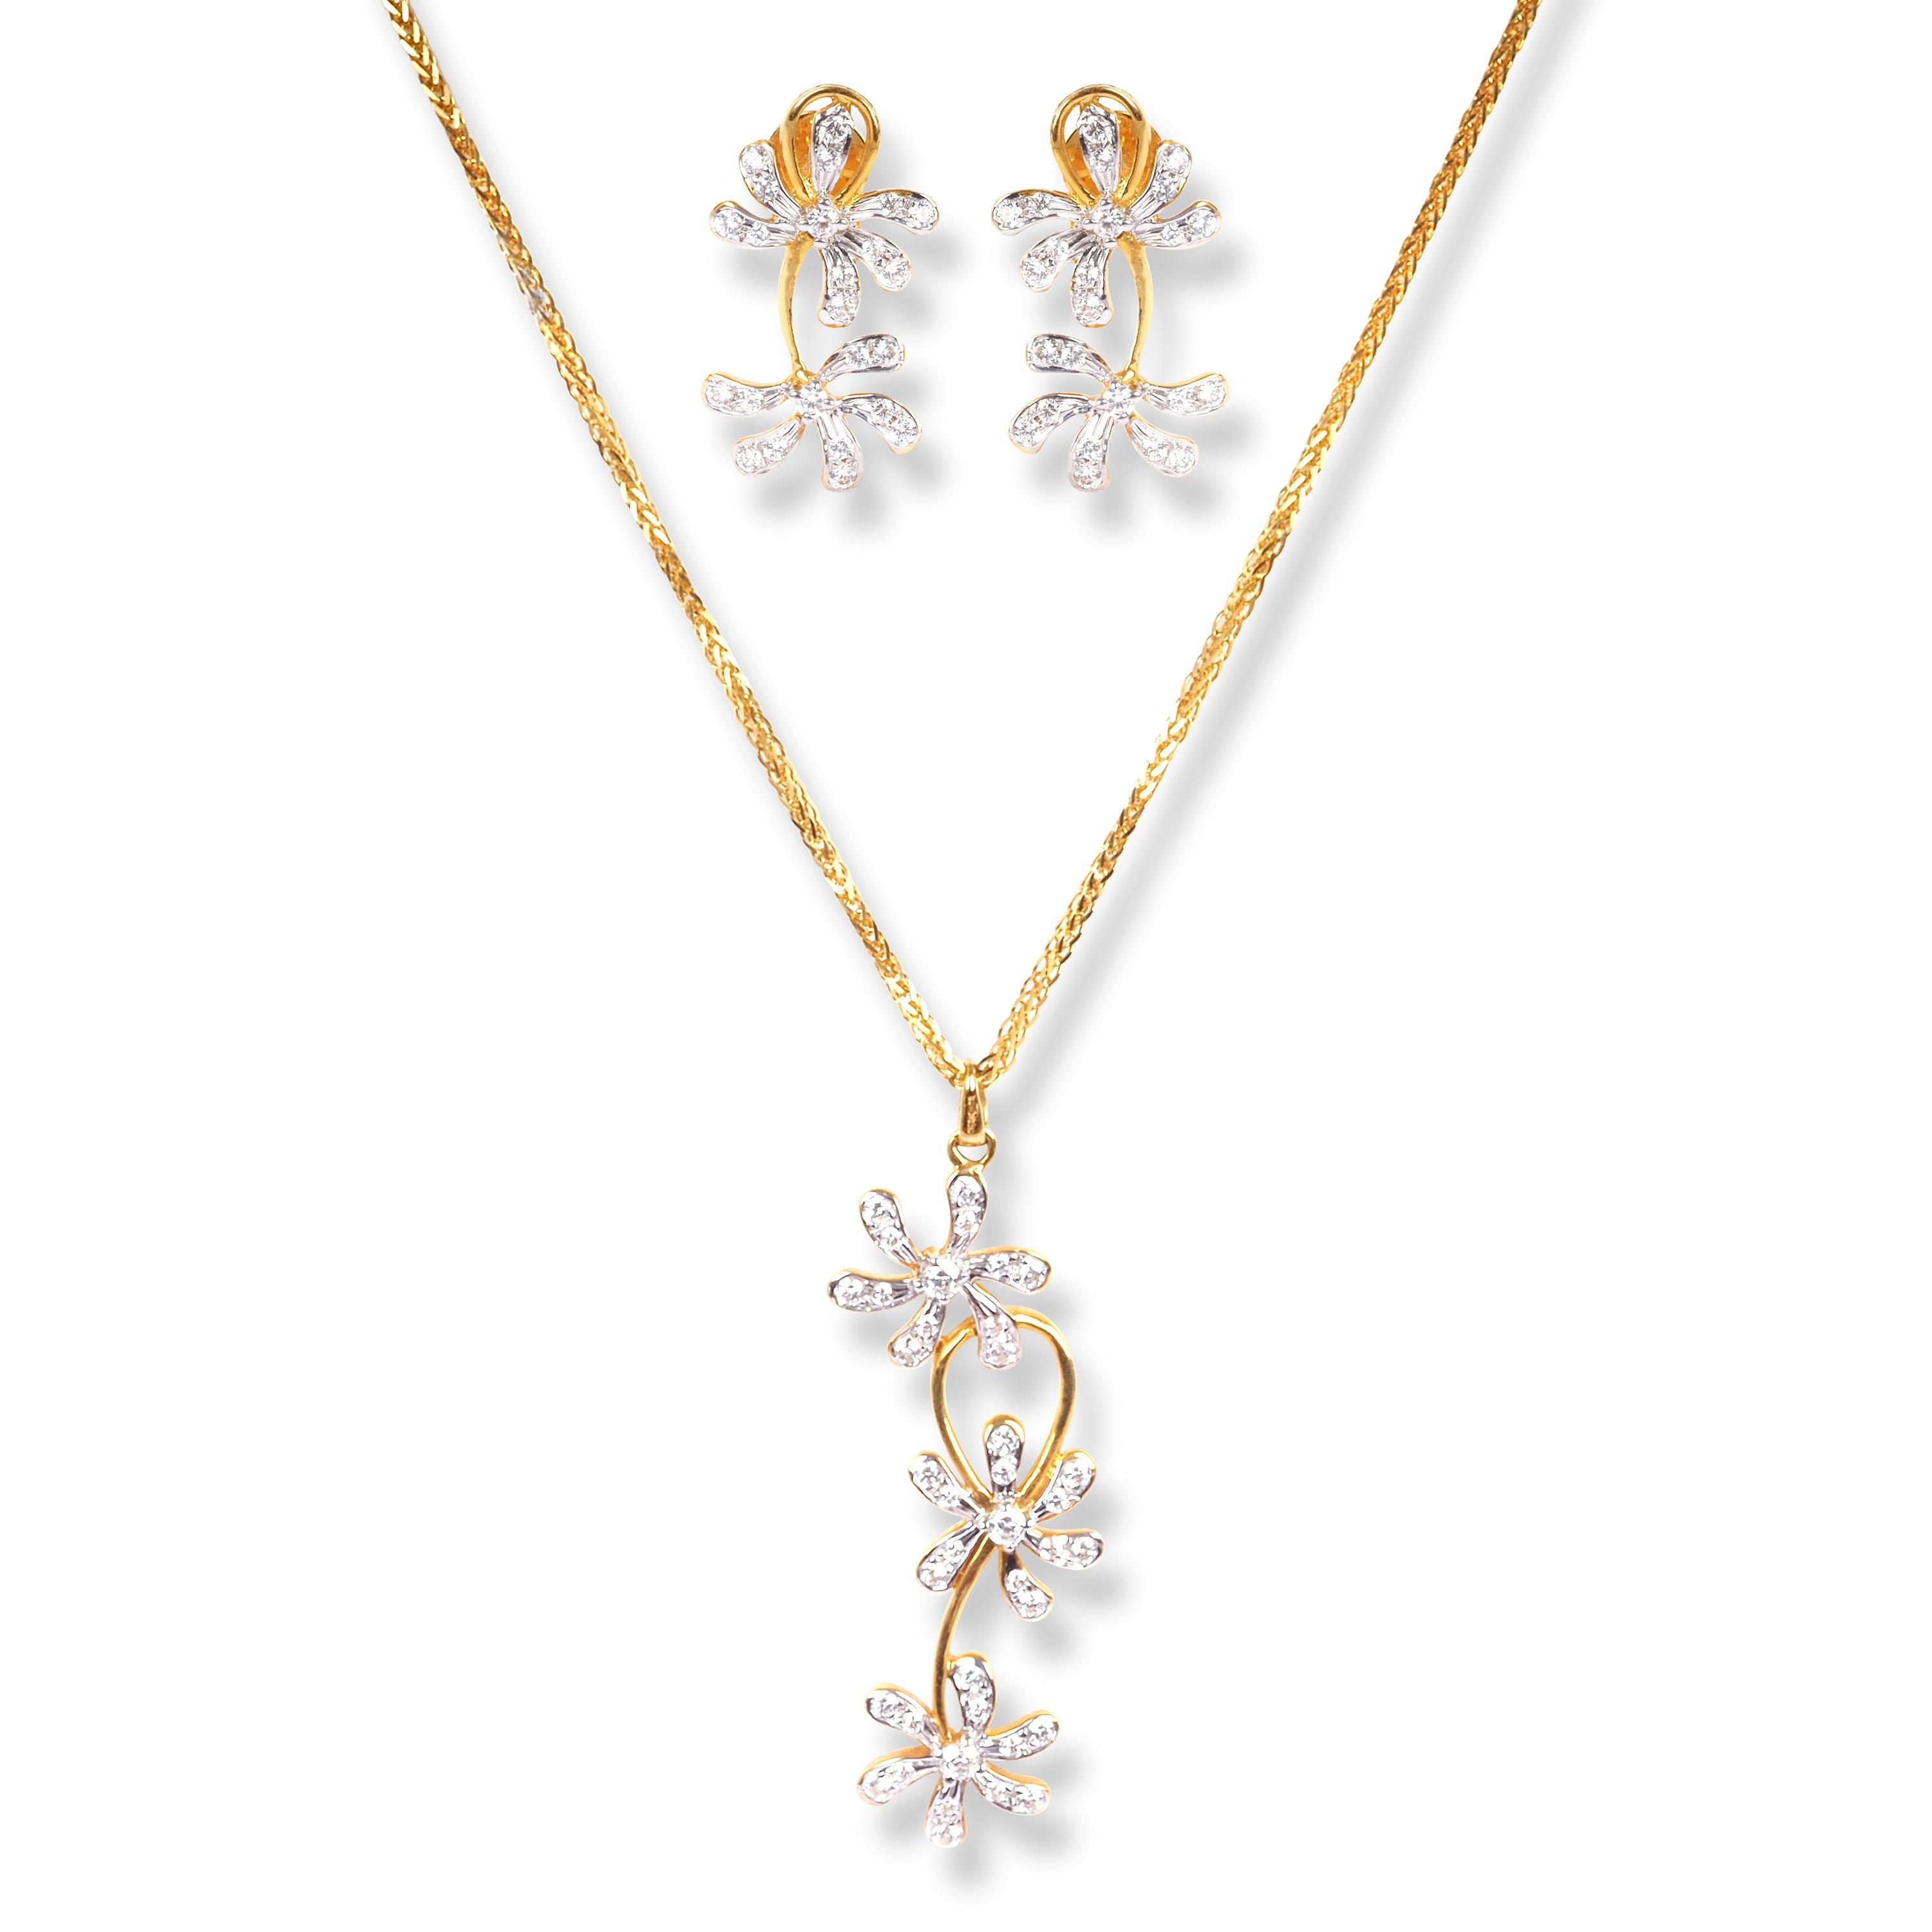 18ct Yellow Gold Floral Design Set with Cubic Zirconia Stones (Pendant + Chain + Stud Earrings) - Minar Jewellers